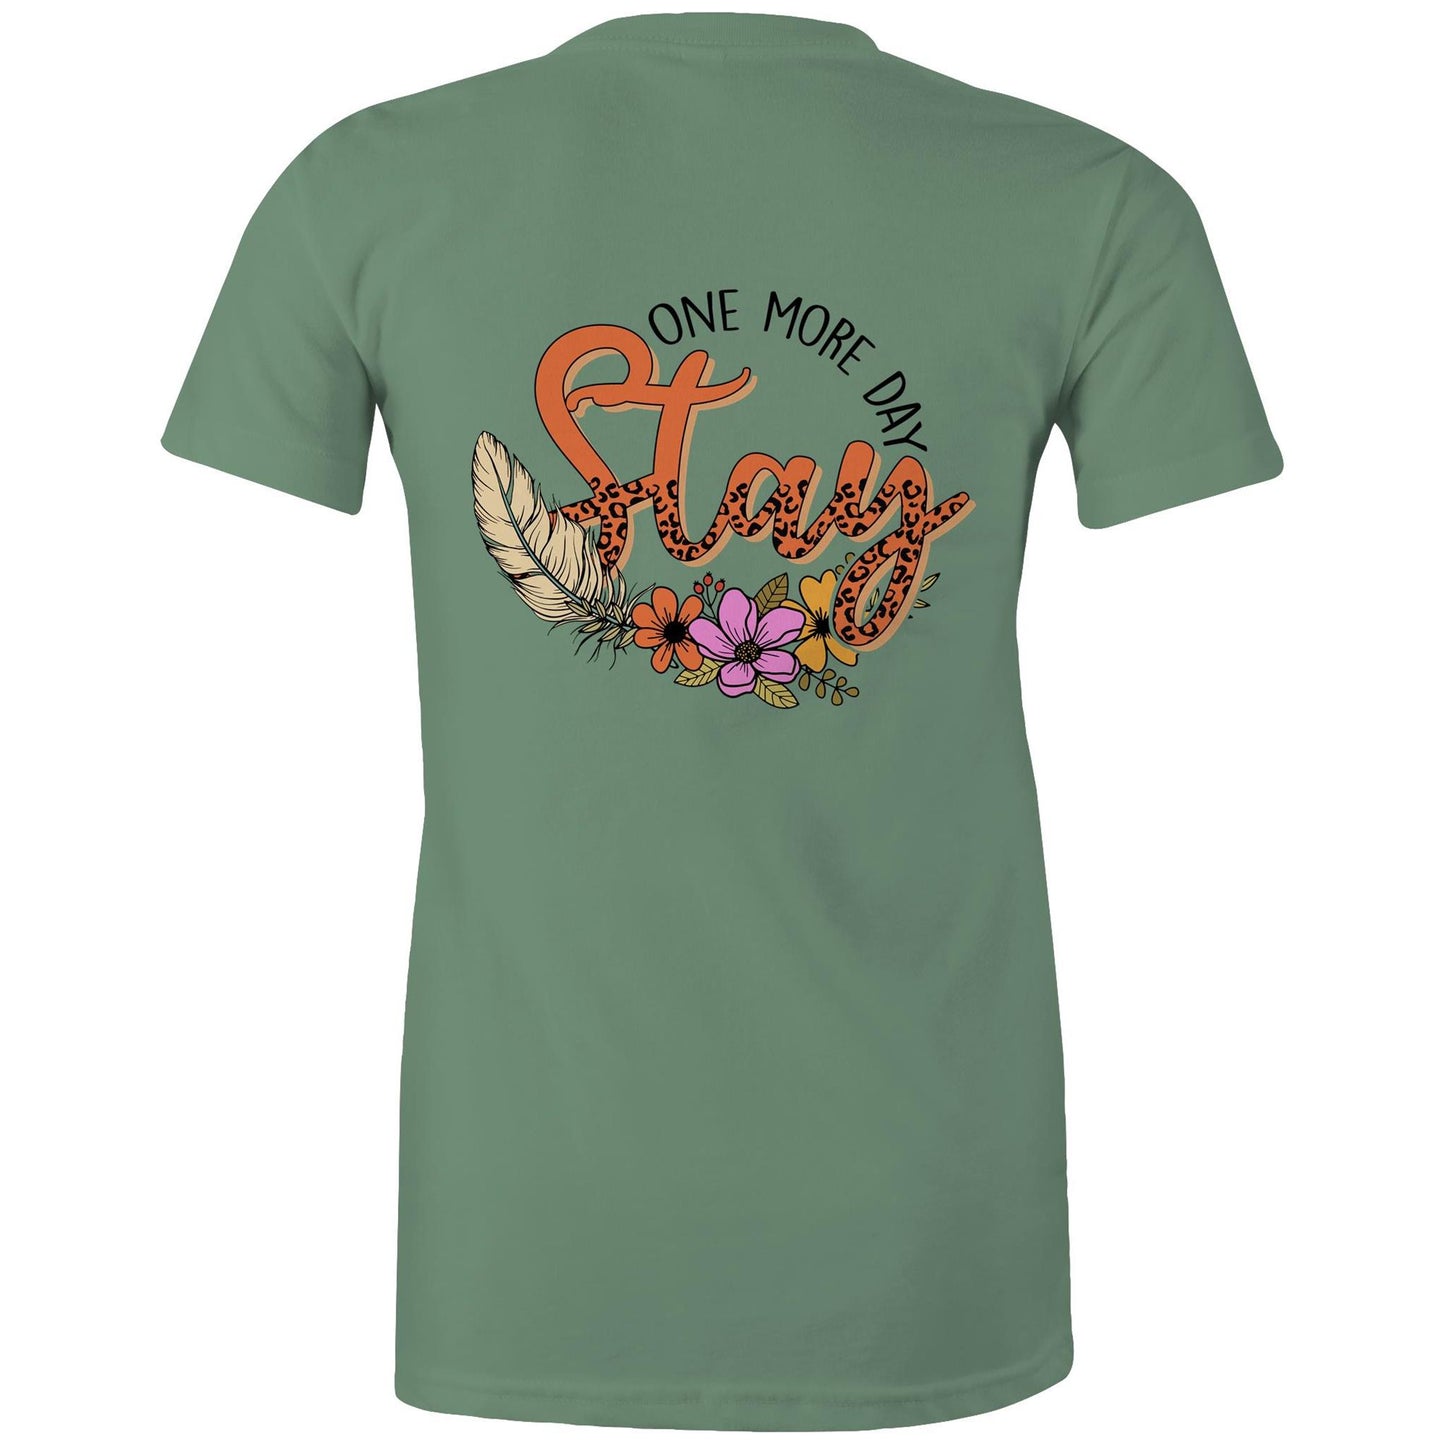 Womens Tee - Stay One More Day (Back)